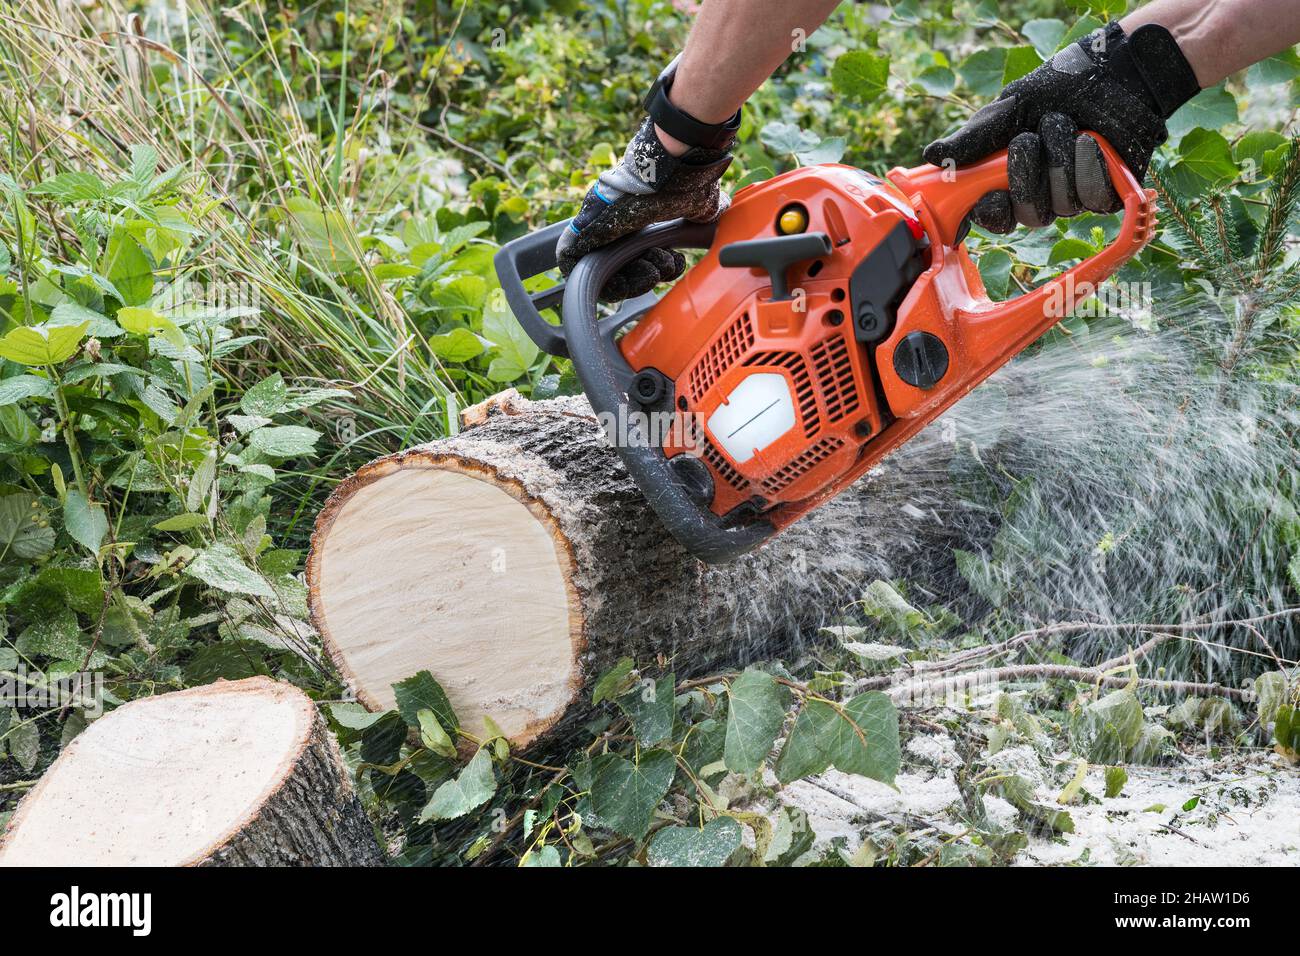 Closeup of power chain saw in lumberjack hands and flying sawdust at cutting wood. Forest worker holding orange portable gasoline chainsaw in greenery. Stock Photo